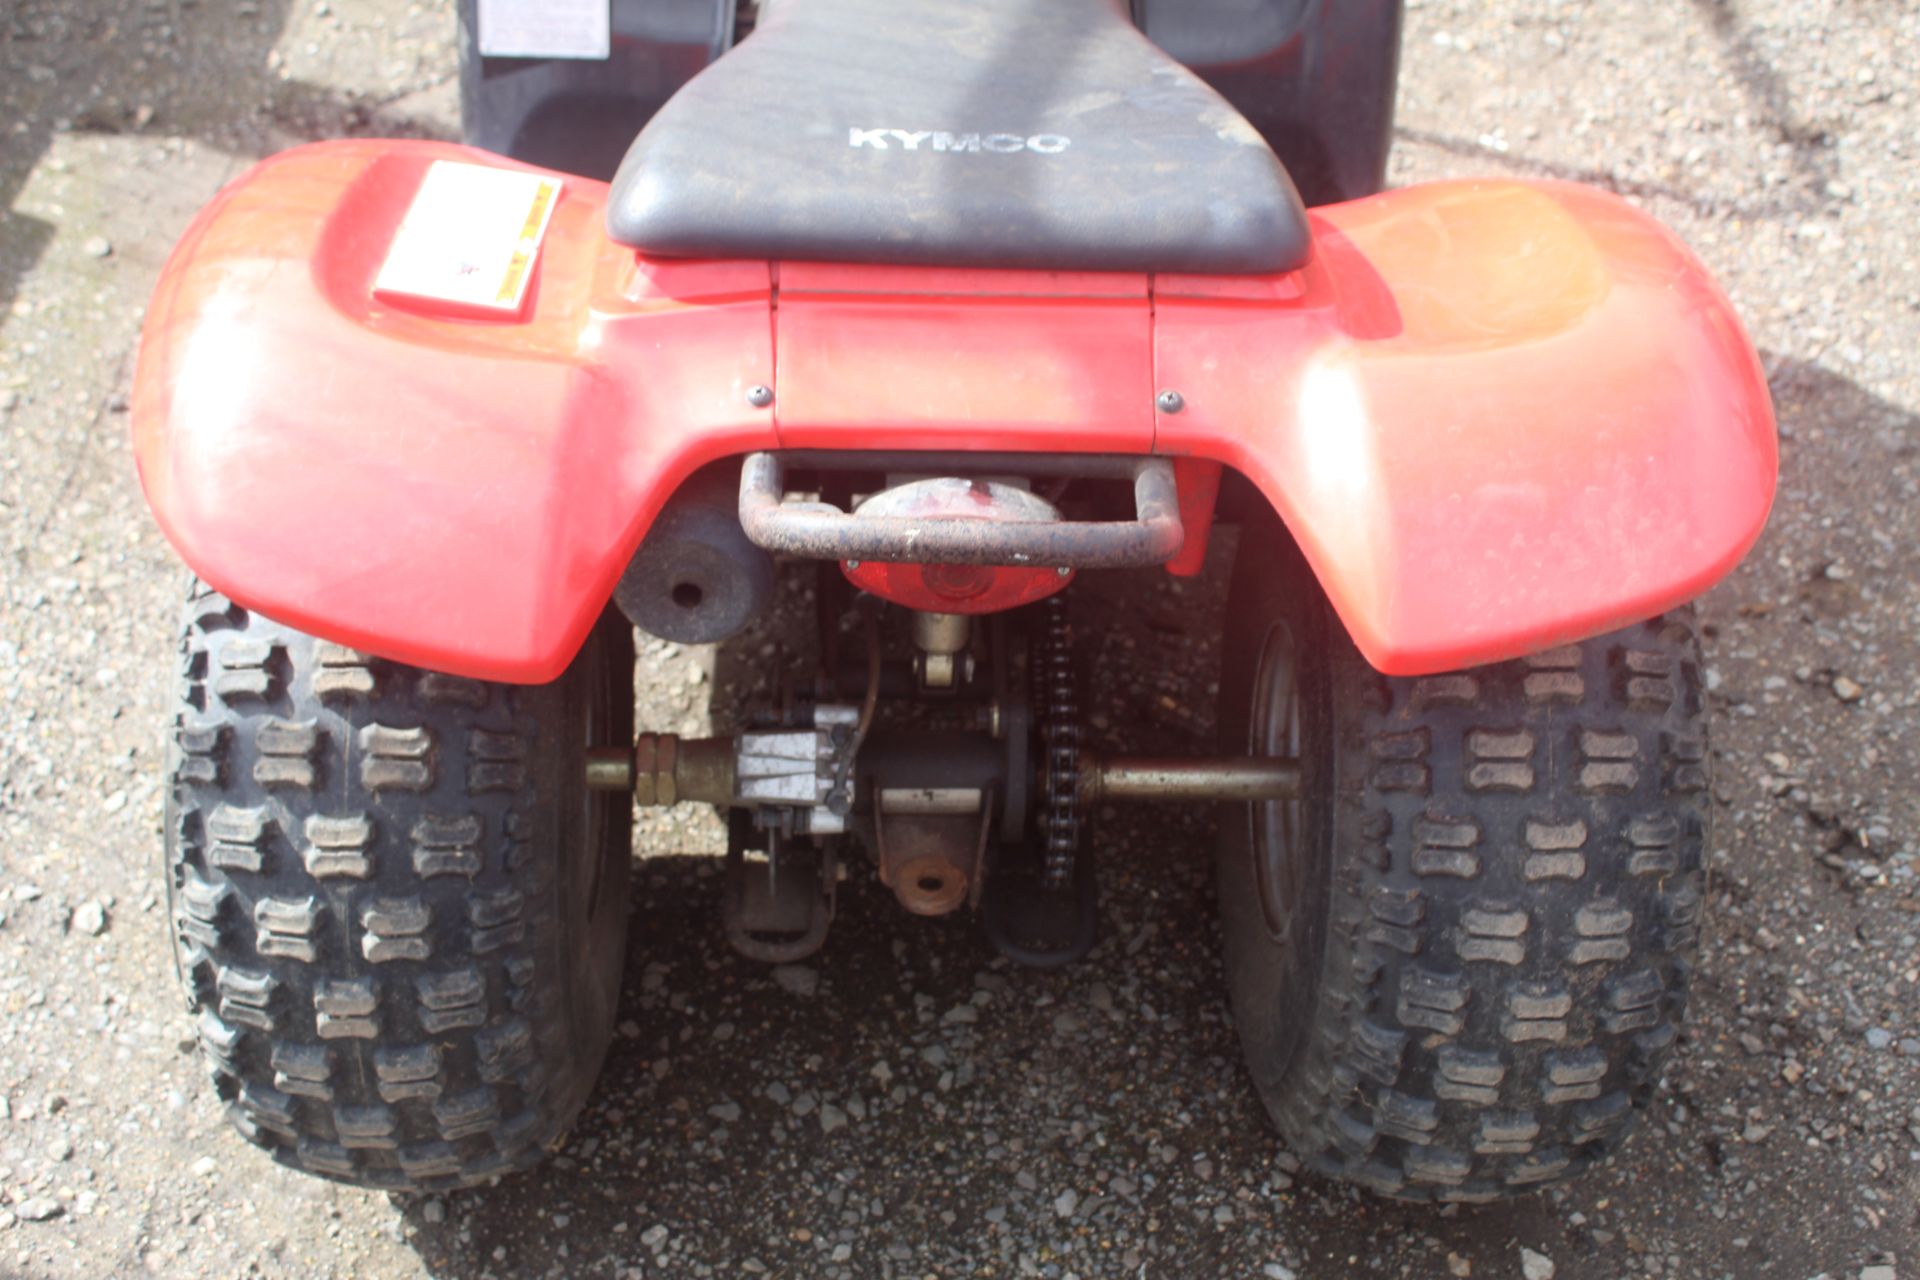 Kymco MX'er 150cc off road ATV. 2004. owned from new. Key, Manual held. - Image 13 of 18